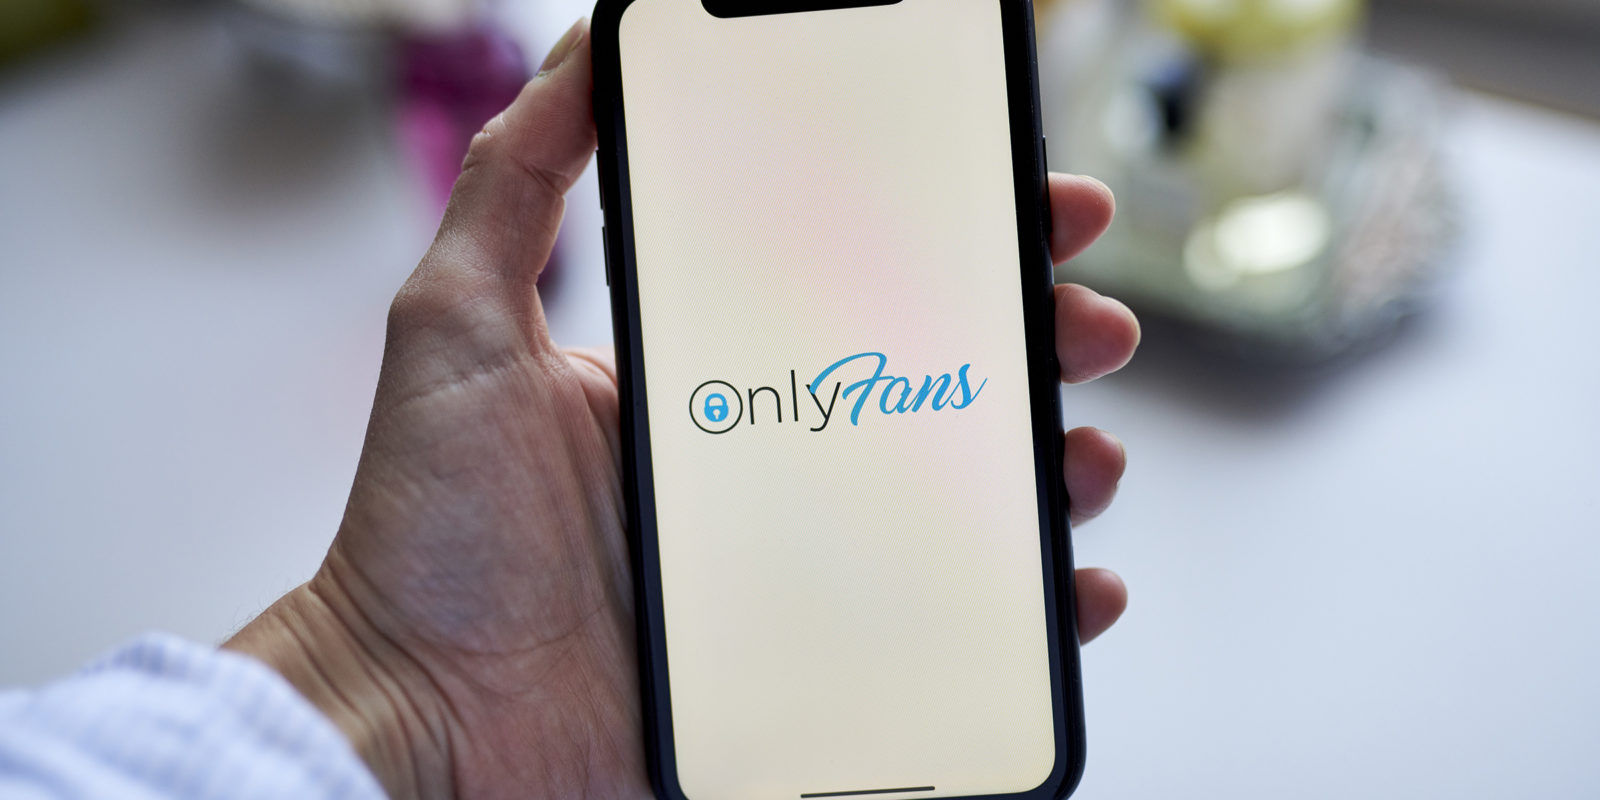 Mumbai-born Comms lead Amrapali Gan becomes the CEO of OnlyFans